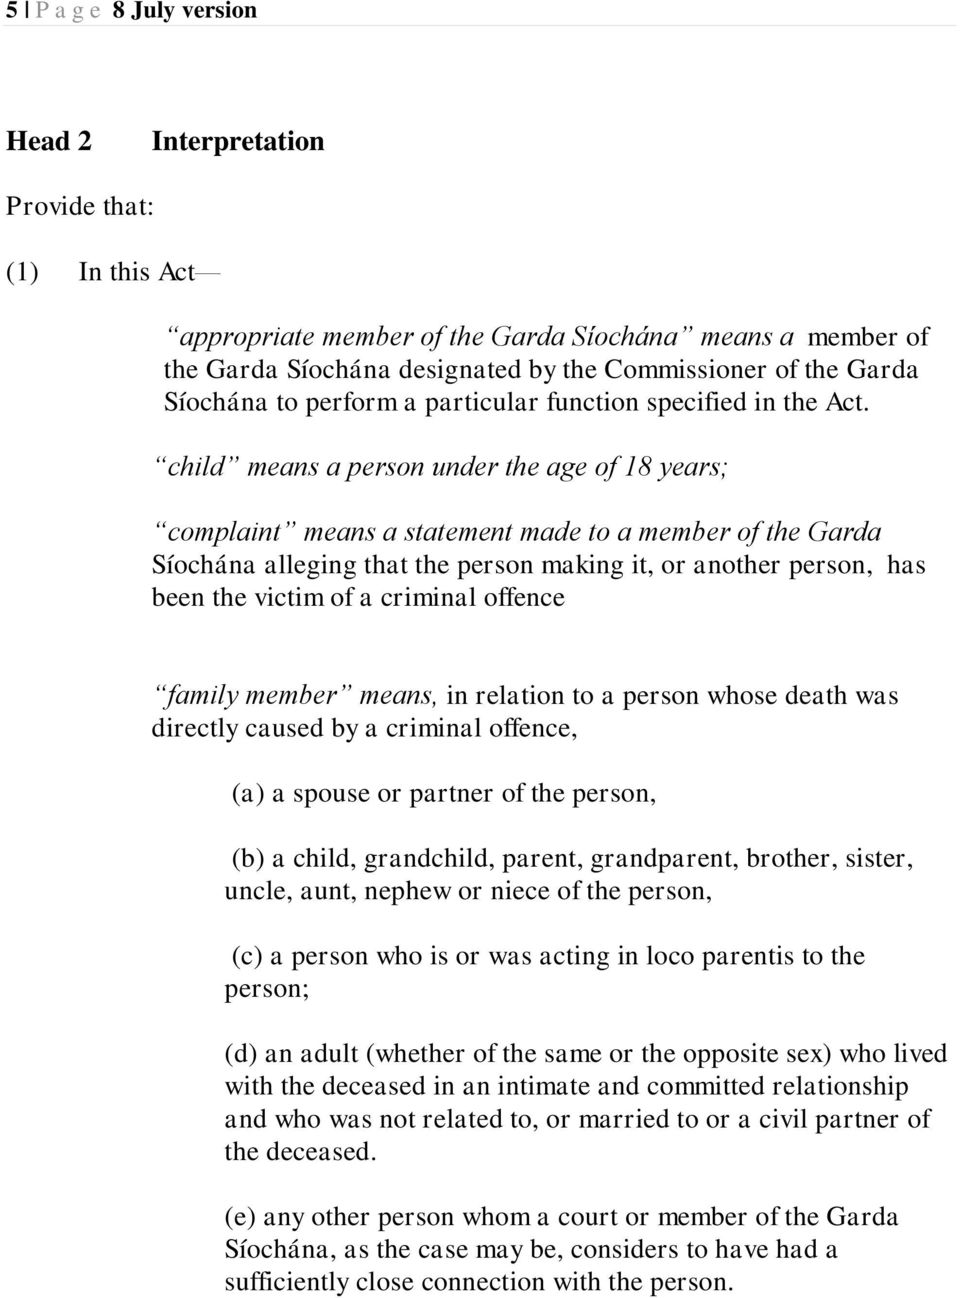 child means a person under the age of 18 years; complaint means a statement made to a member of the Garda Síochána alleging that the person making it, or another person, has been the victim of a